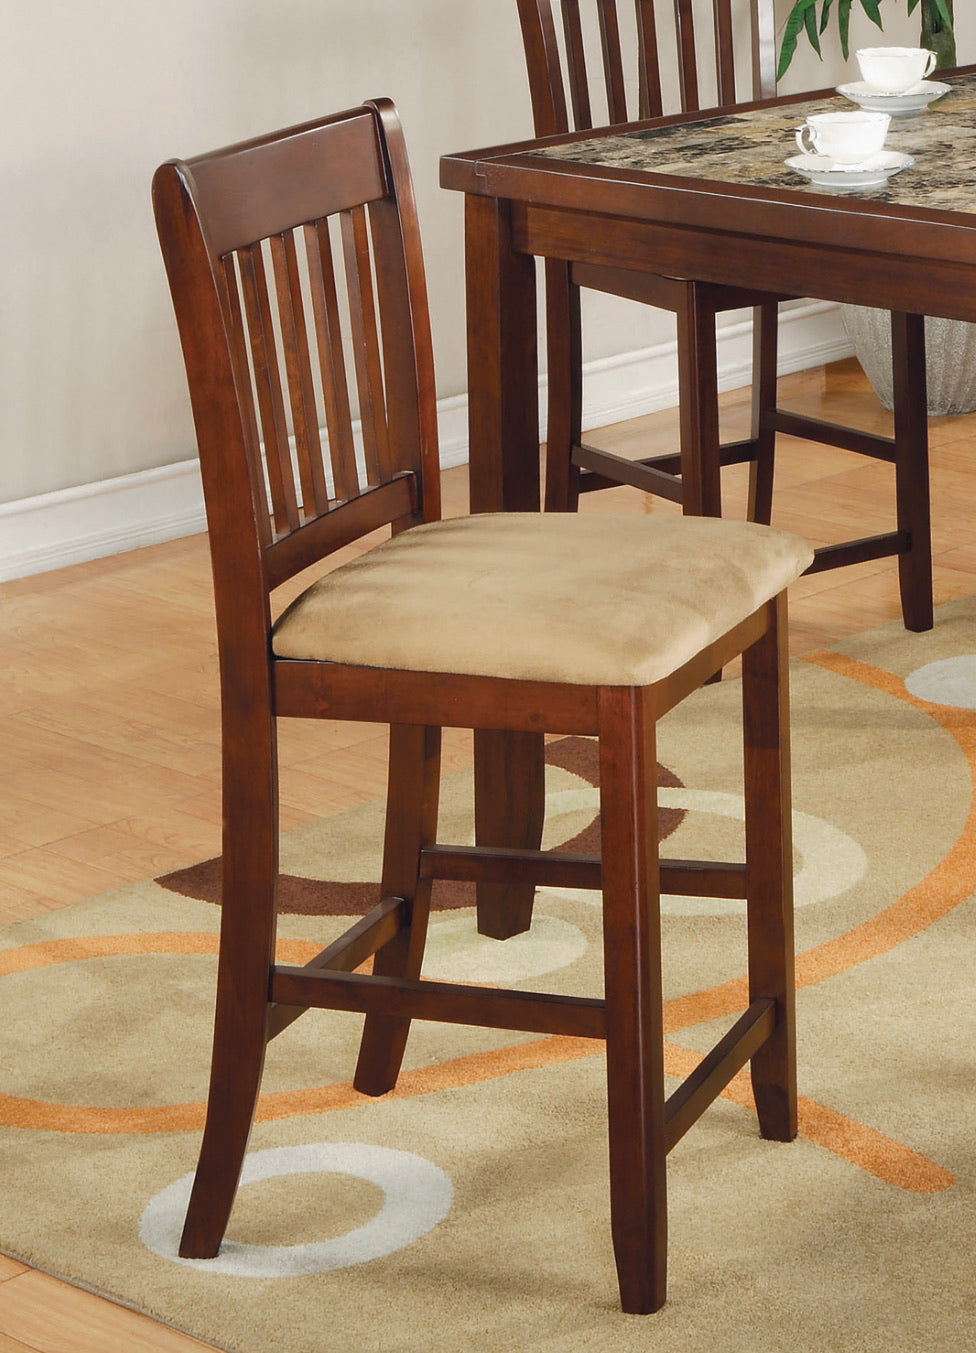 Counter Height Dining Set Red Brown And Tan. 5 PC SET